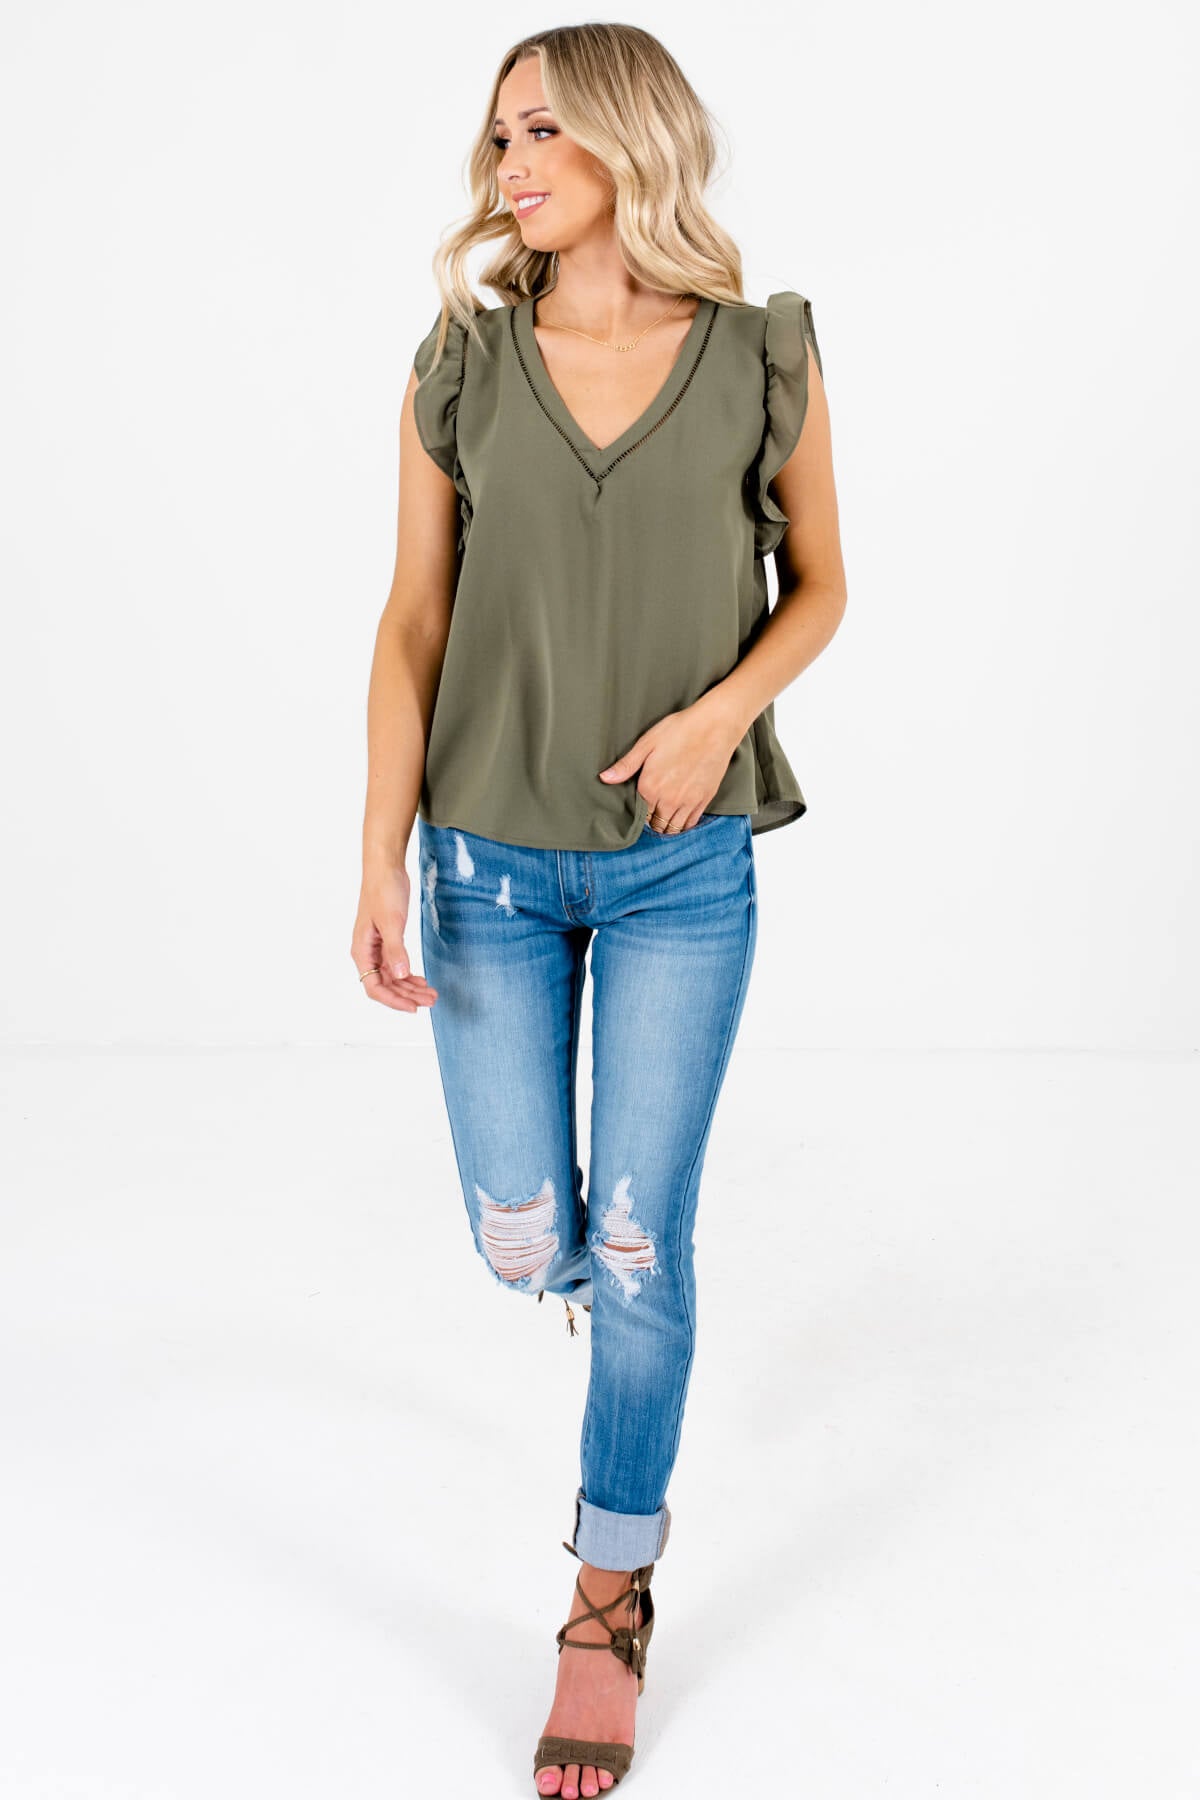 Women's Olive Green Business Casual Boutique Clothing